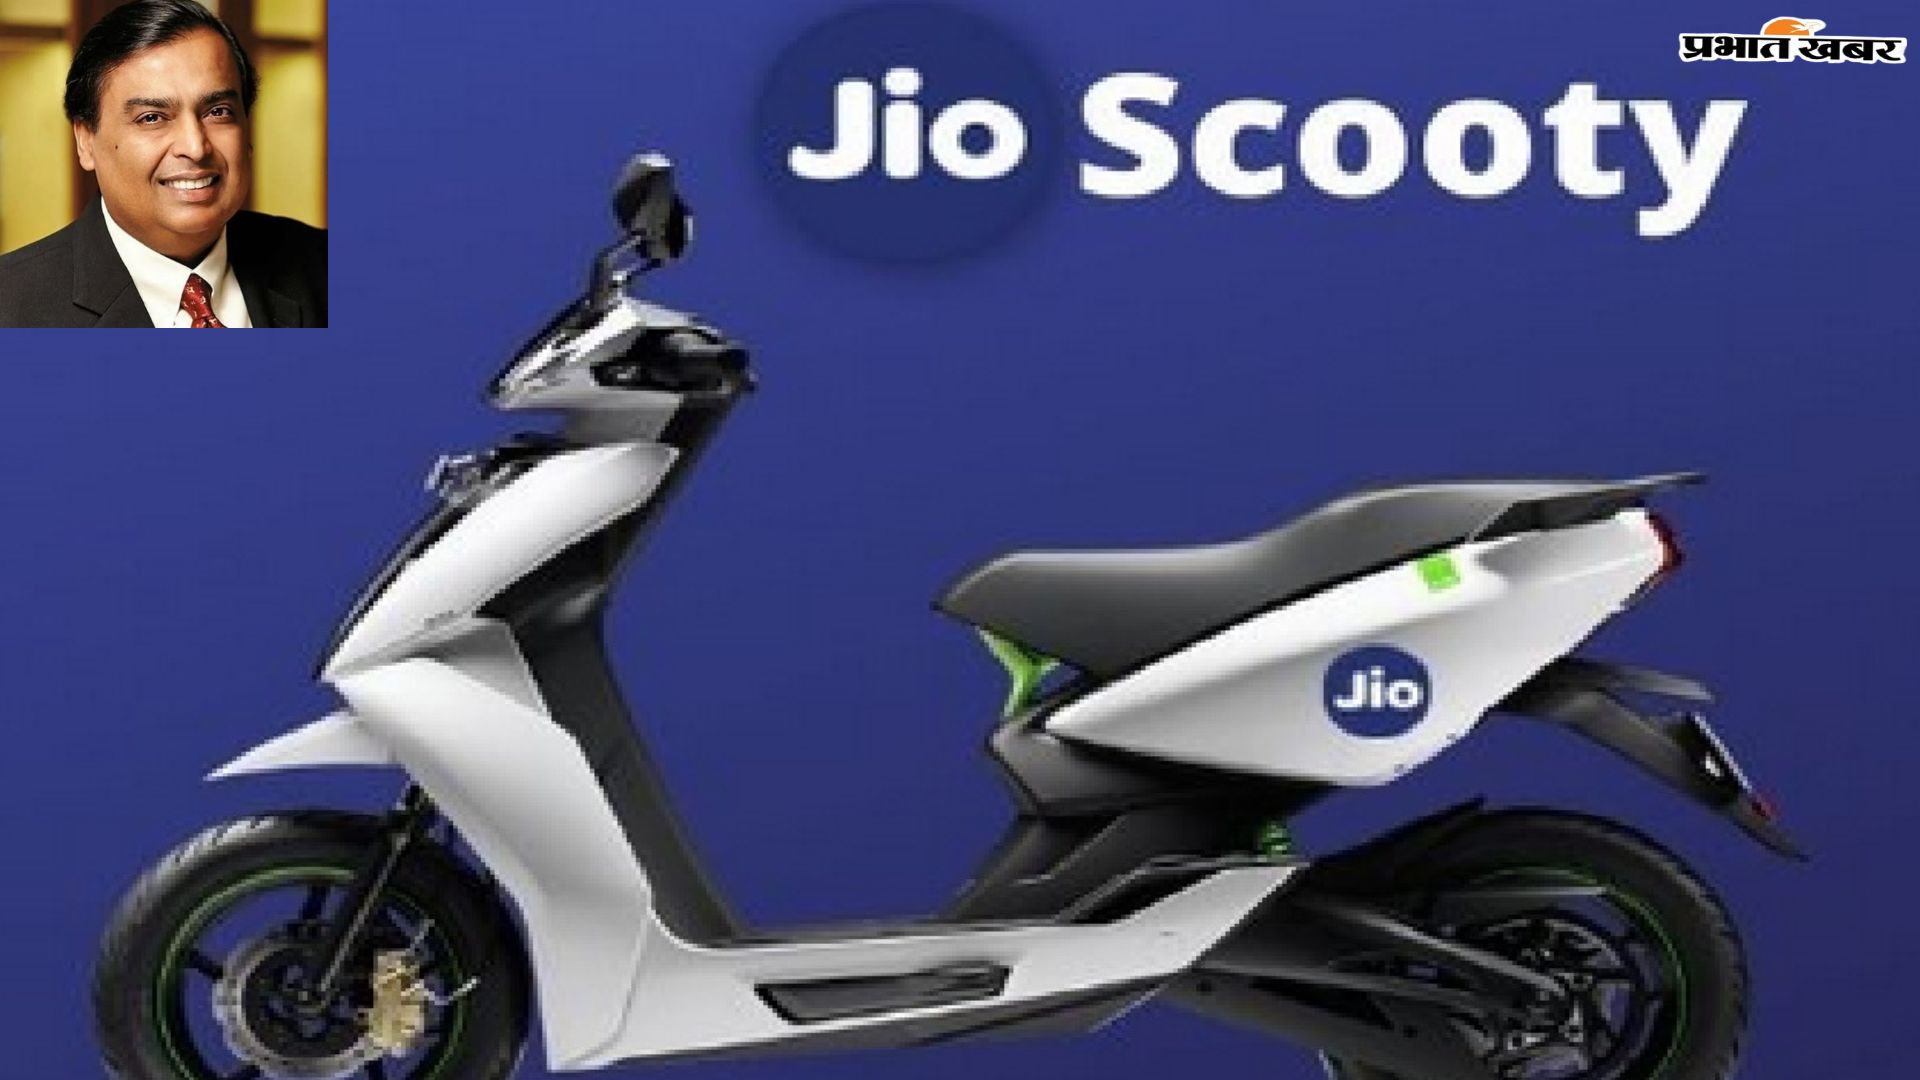 Mukesh Ambani is going to bring a cheap electric scooter like Jio